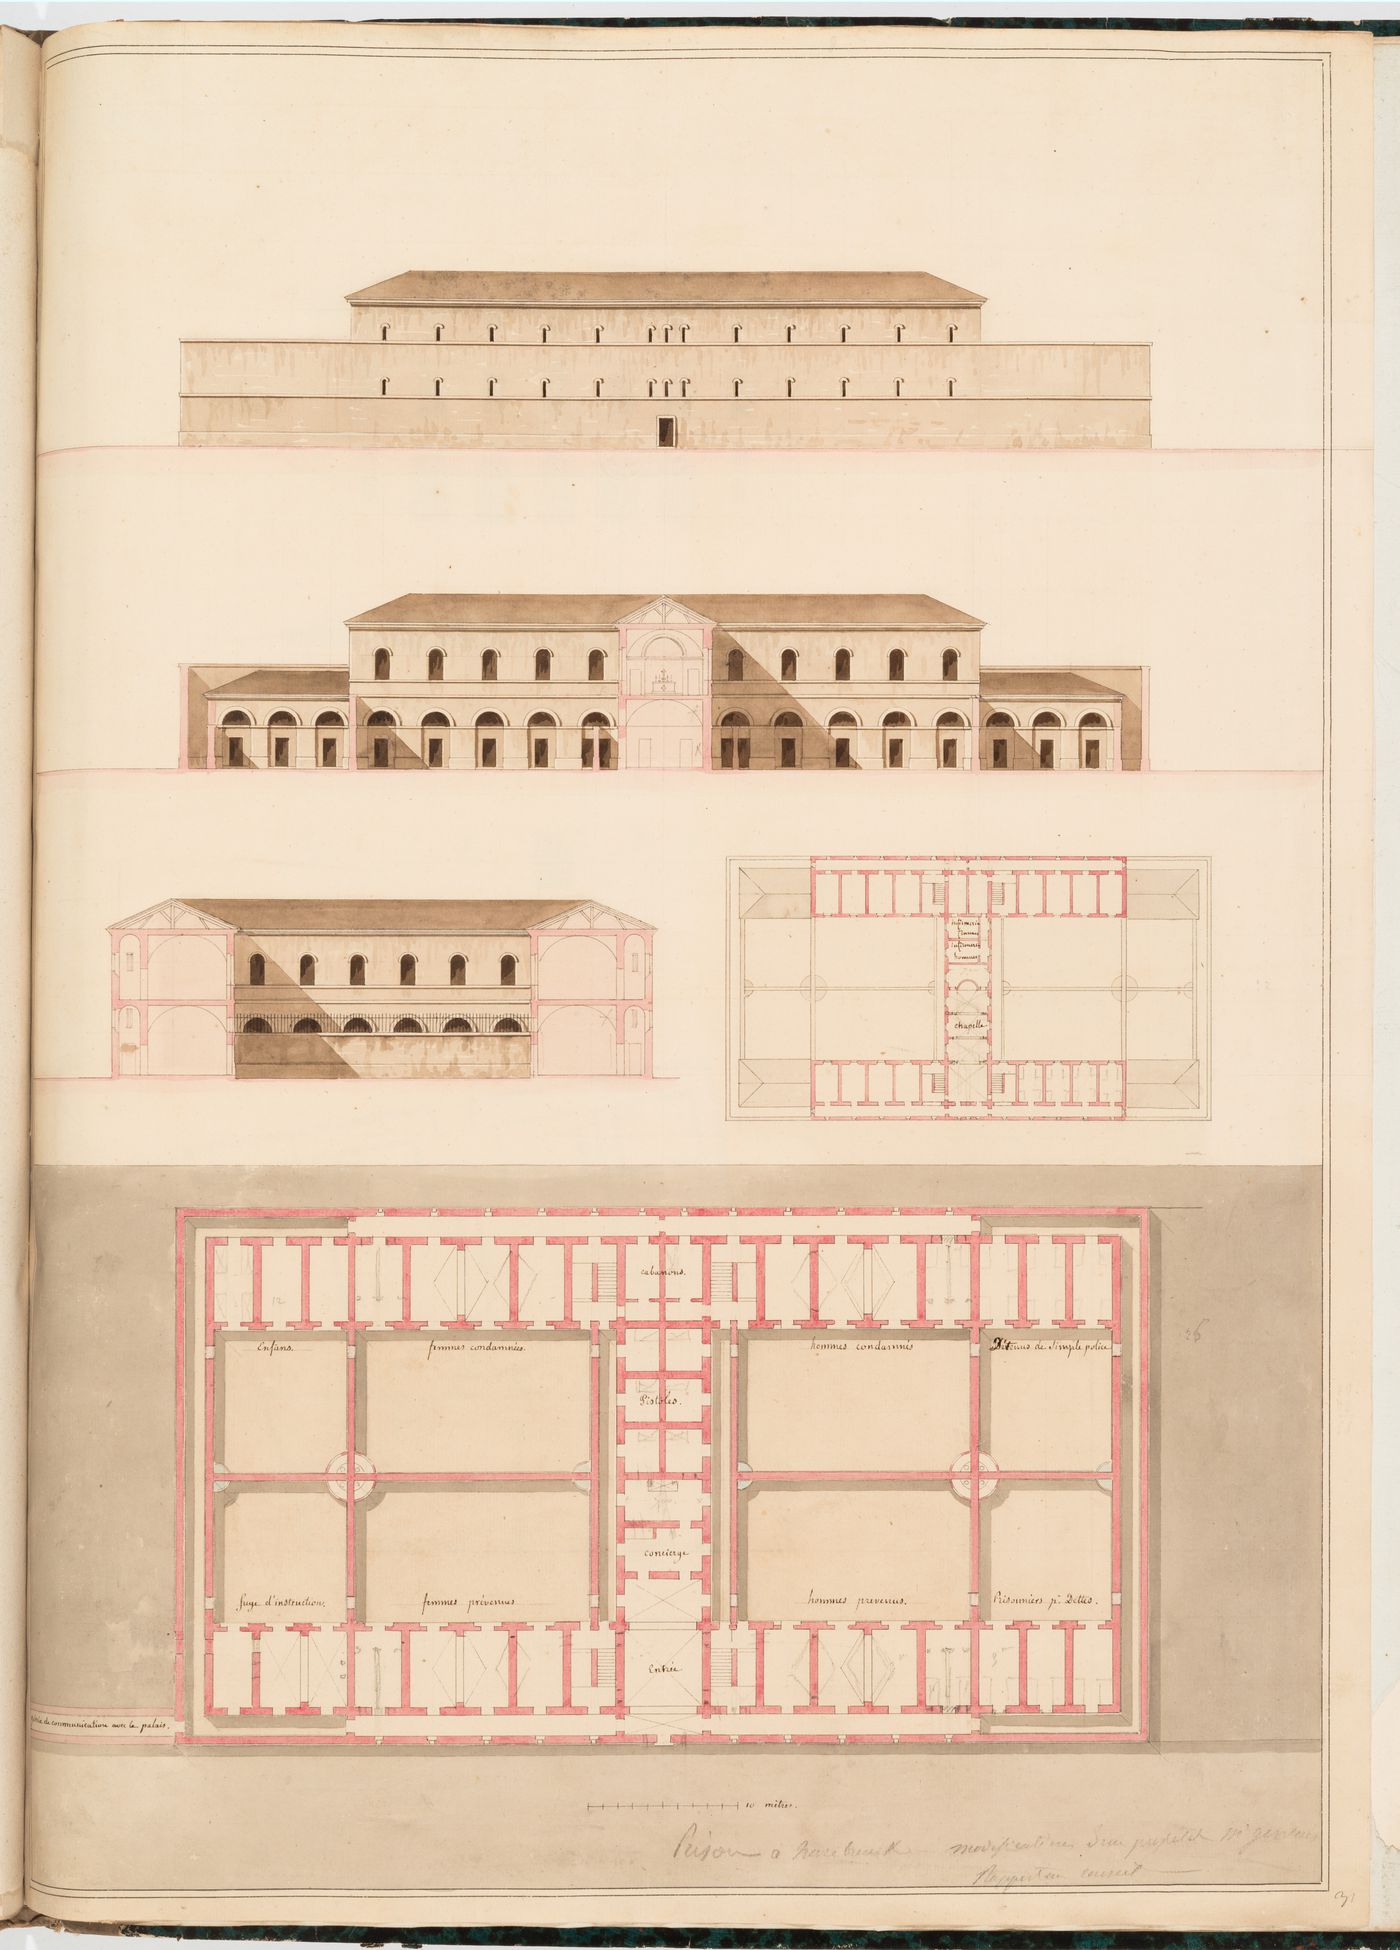 Prison, Hazebrouck, France: Elevation, sectional elevations, and plans